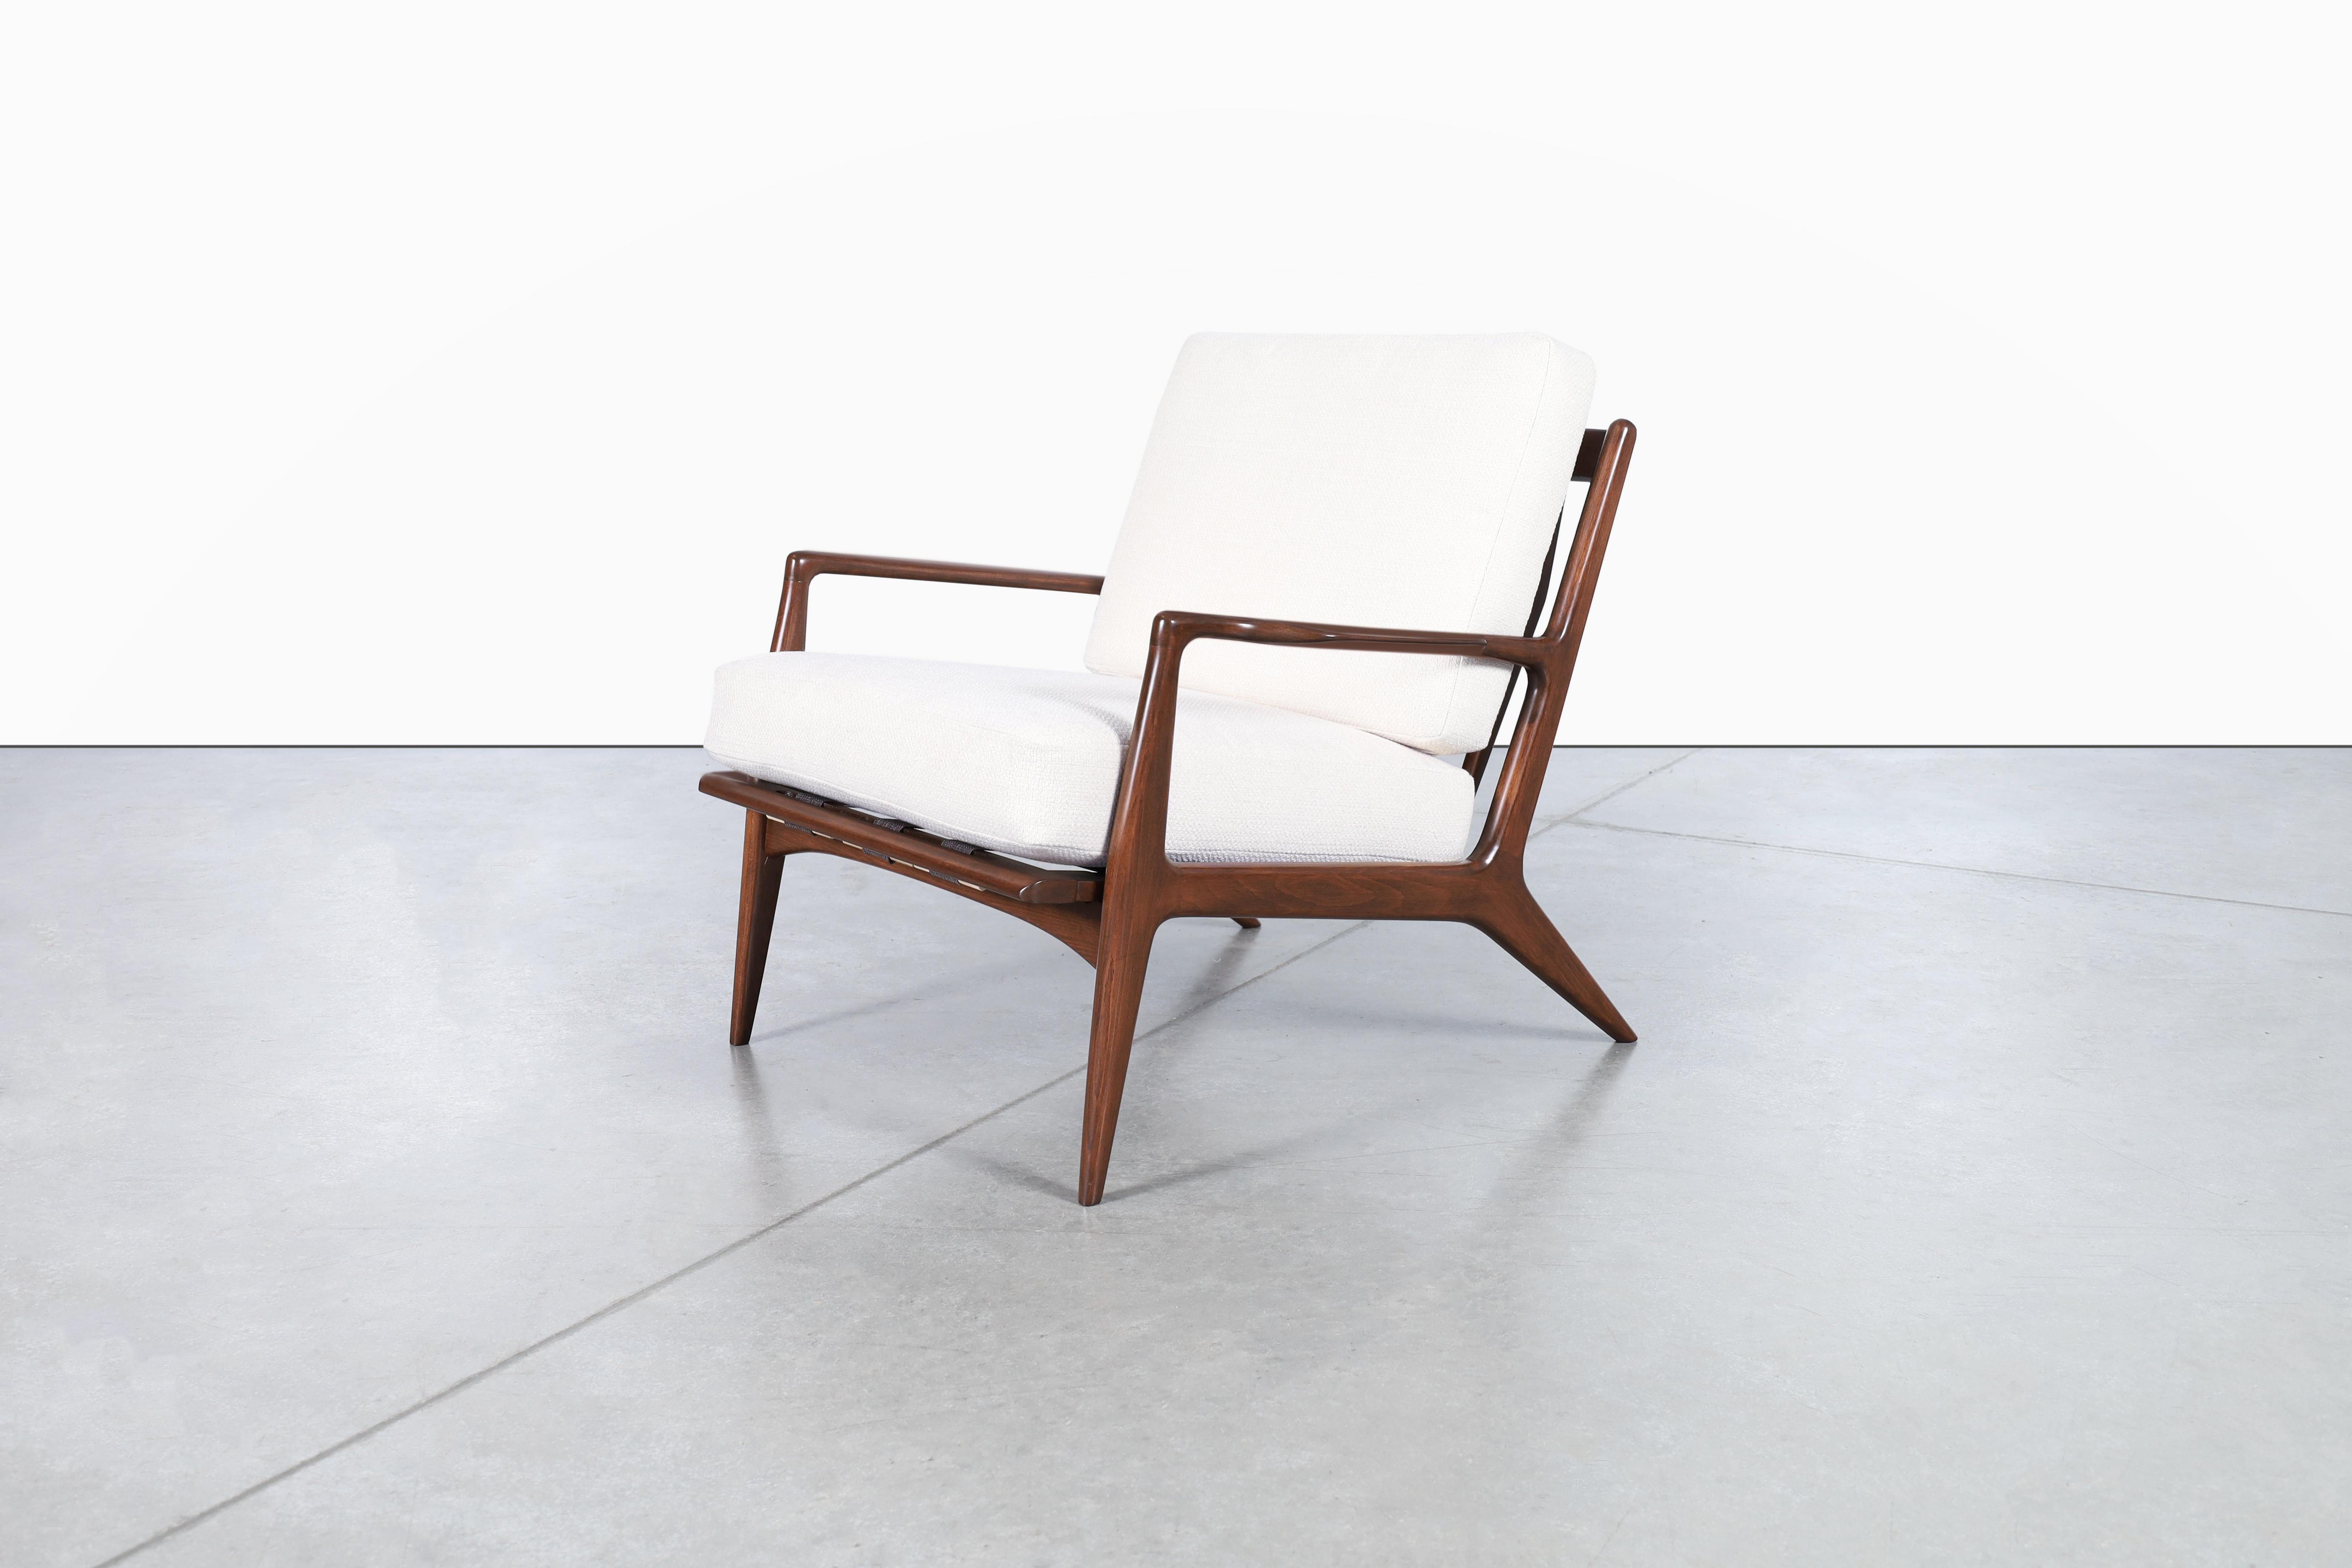 Amazing Danish modern walnut lounge chair designed by architect and furniture maker Ib Kofod Larsen and manufactured by Selig in Denmark, circa 1960s. This fabulous lounge chair features a solid walnut-stained beech frame with angled legs, sculpted